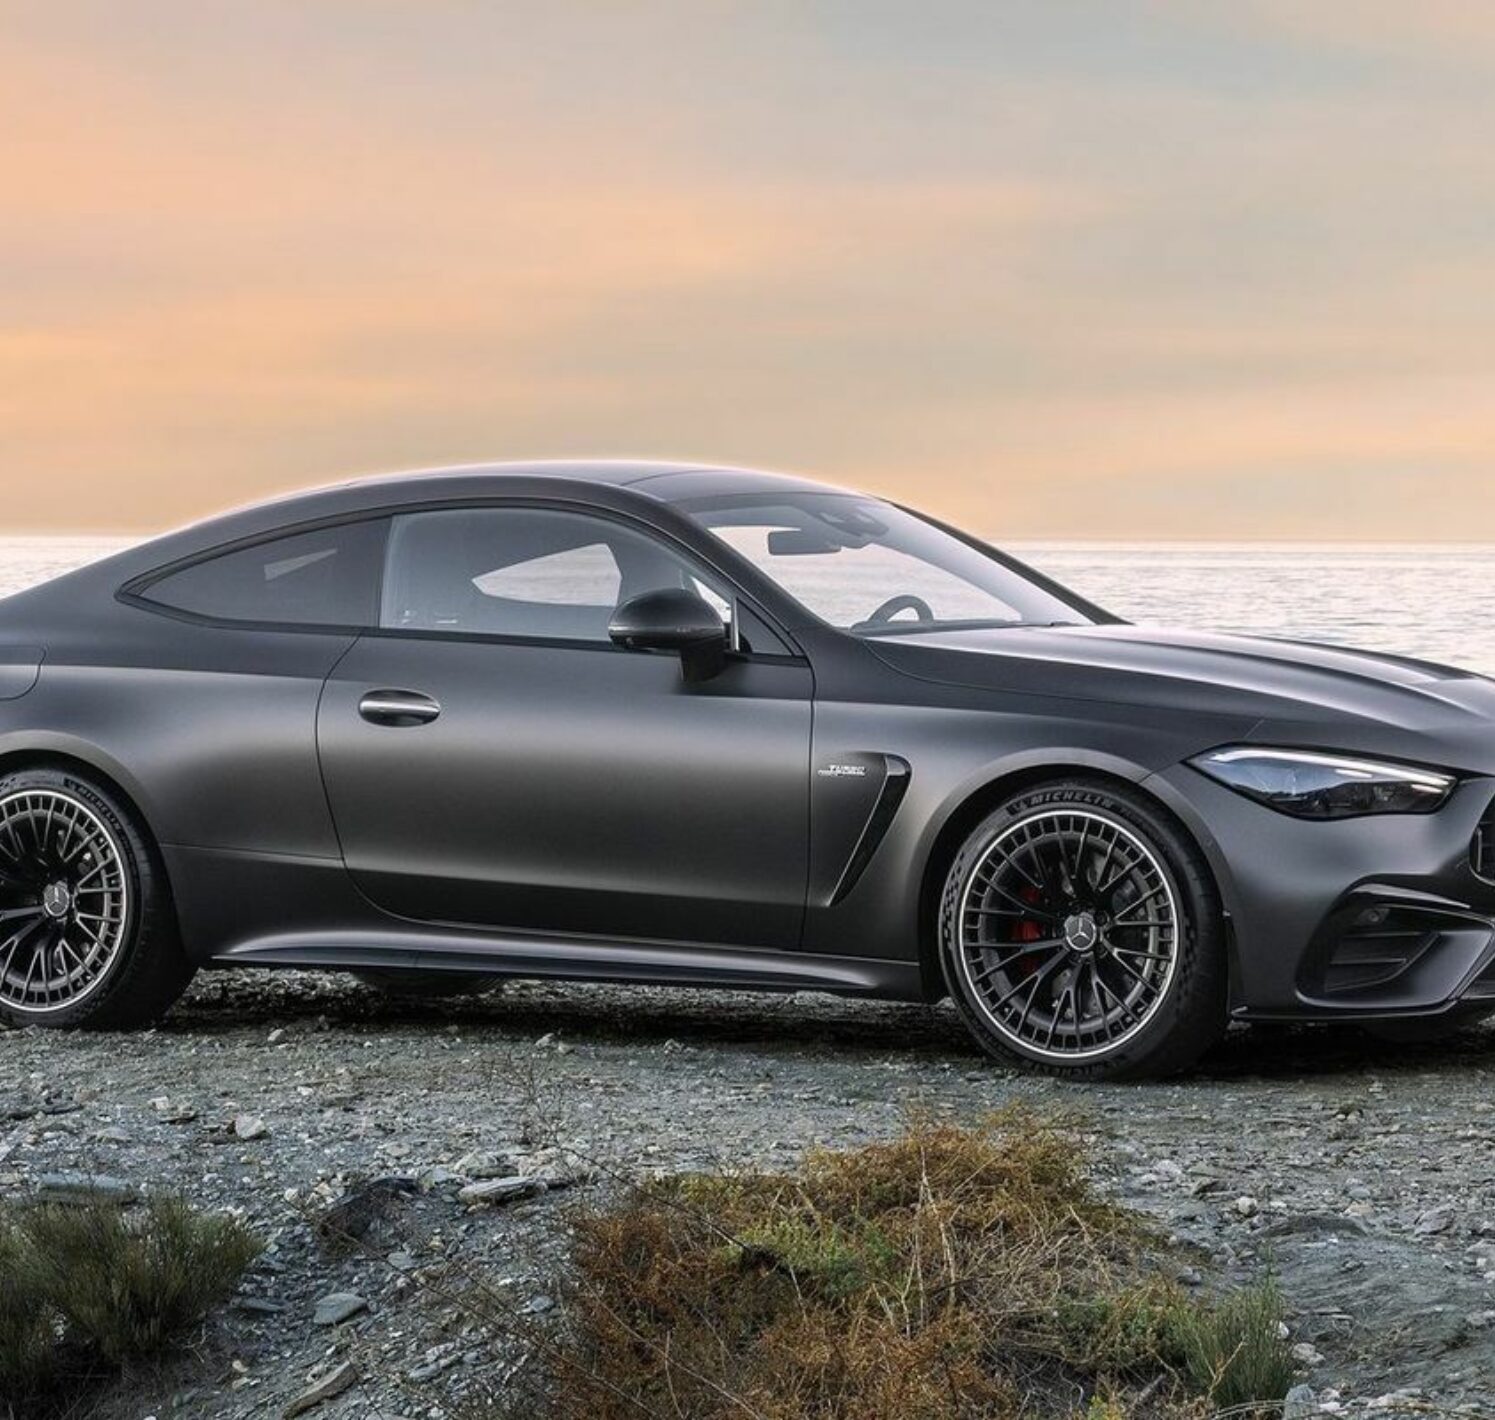 https://autofilter.sk/assets/images/cle-kupe/gallery/mercedes-benz-cle-53-amg-coupe-2024_20-galeria.jpg - obrazok